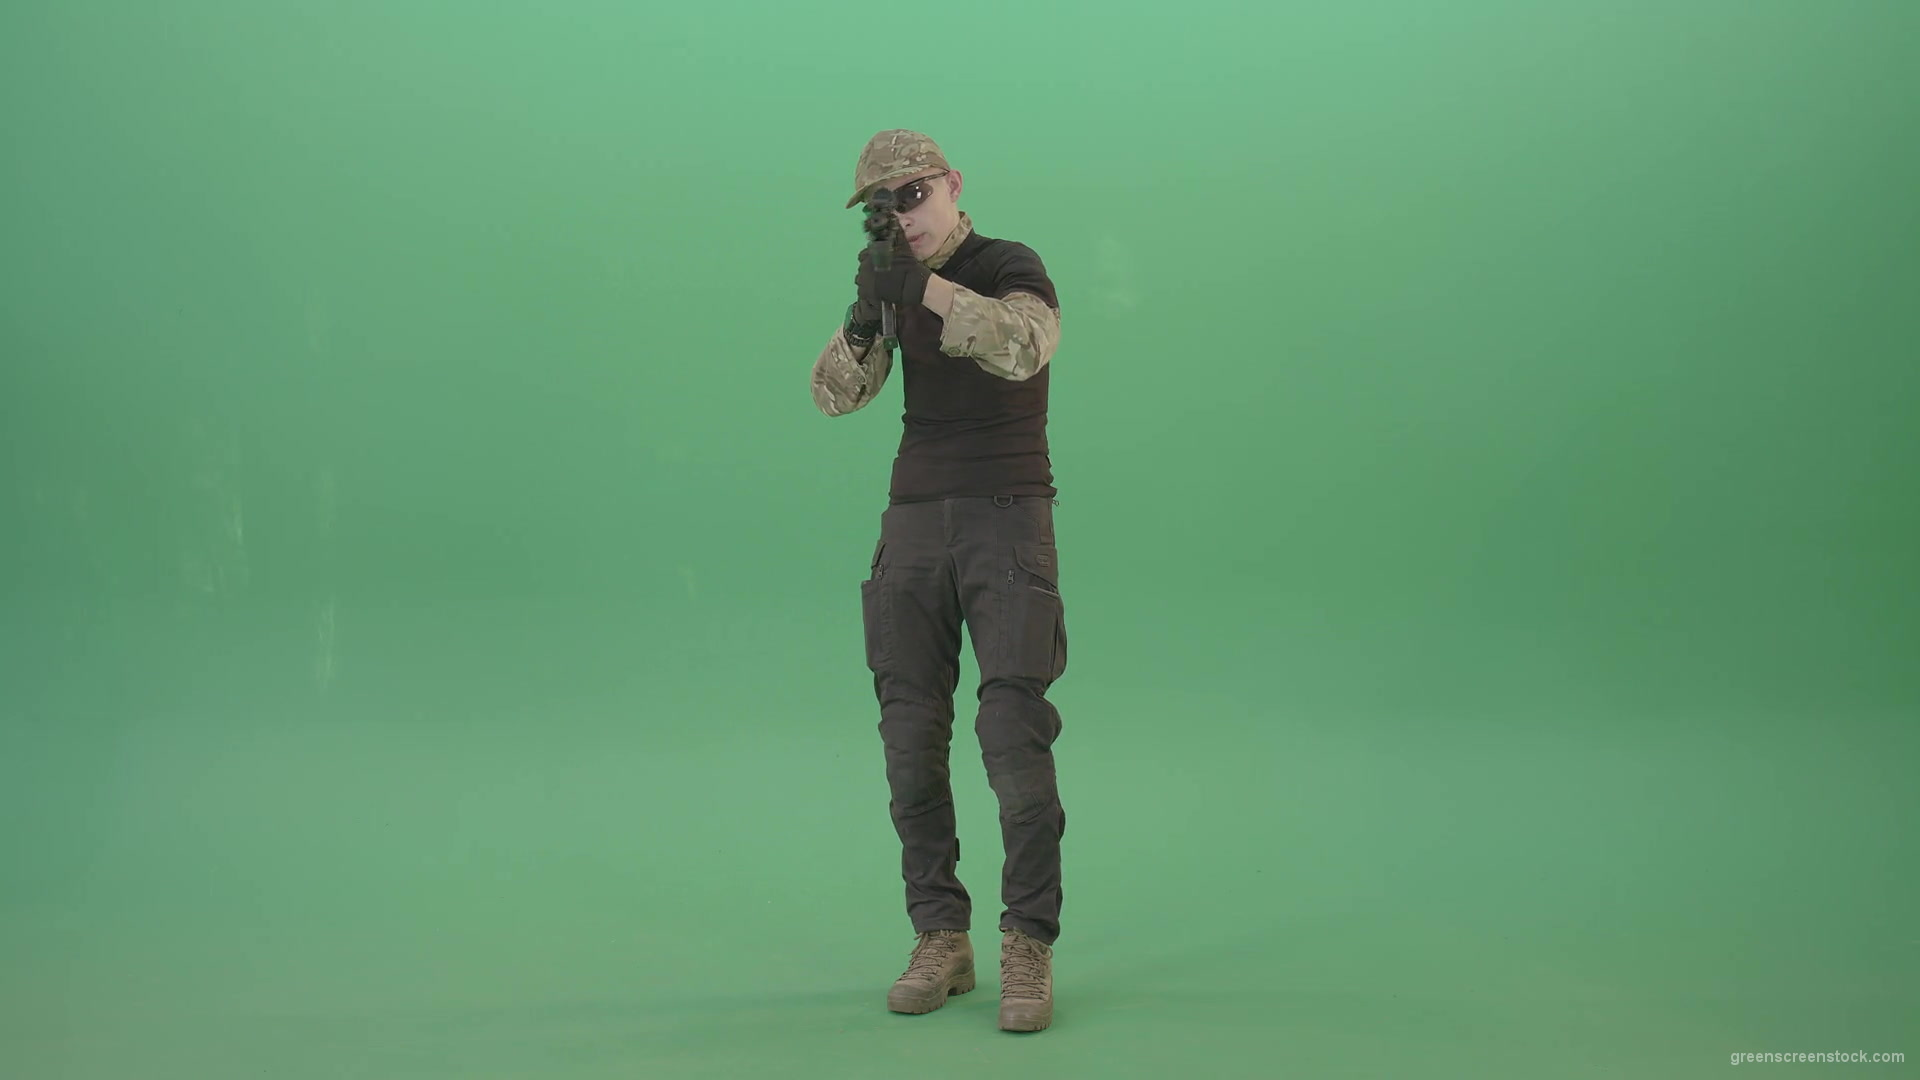 Man-in-Military-uniform-shooting-with-Army-machine-gun-isolated-on-Green-Screen-4K-Video-Footage-1920_006 Green Screen Stock